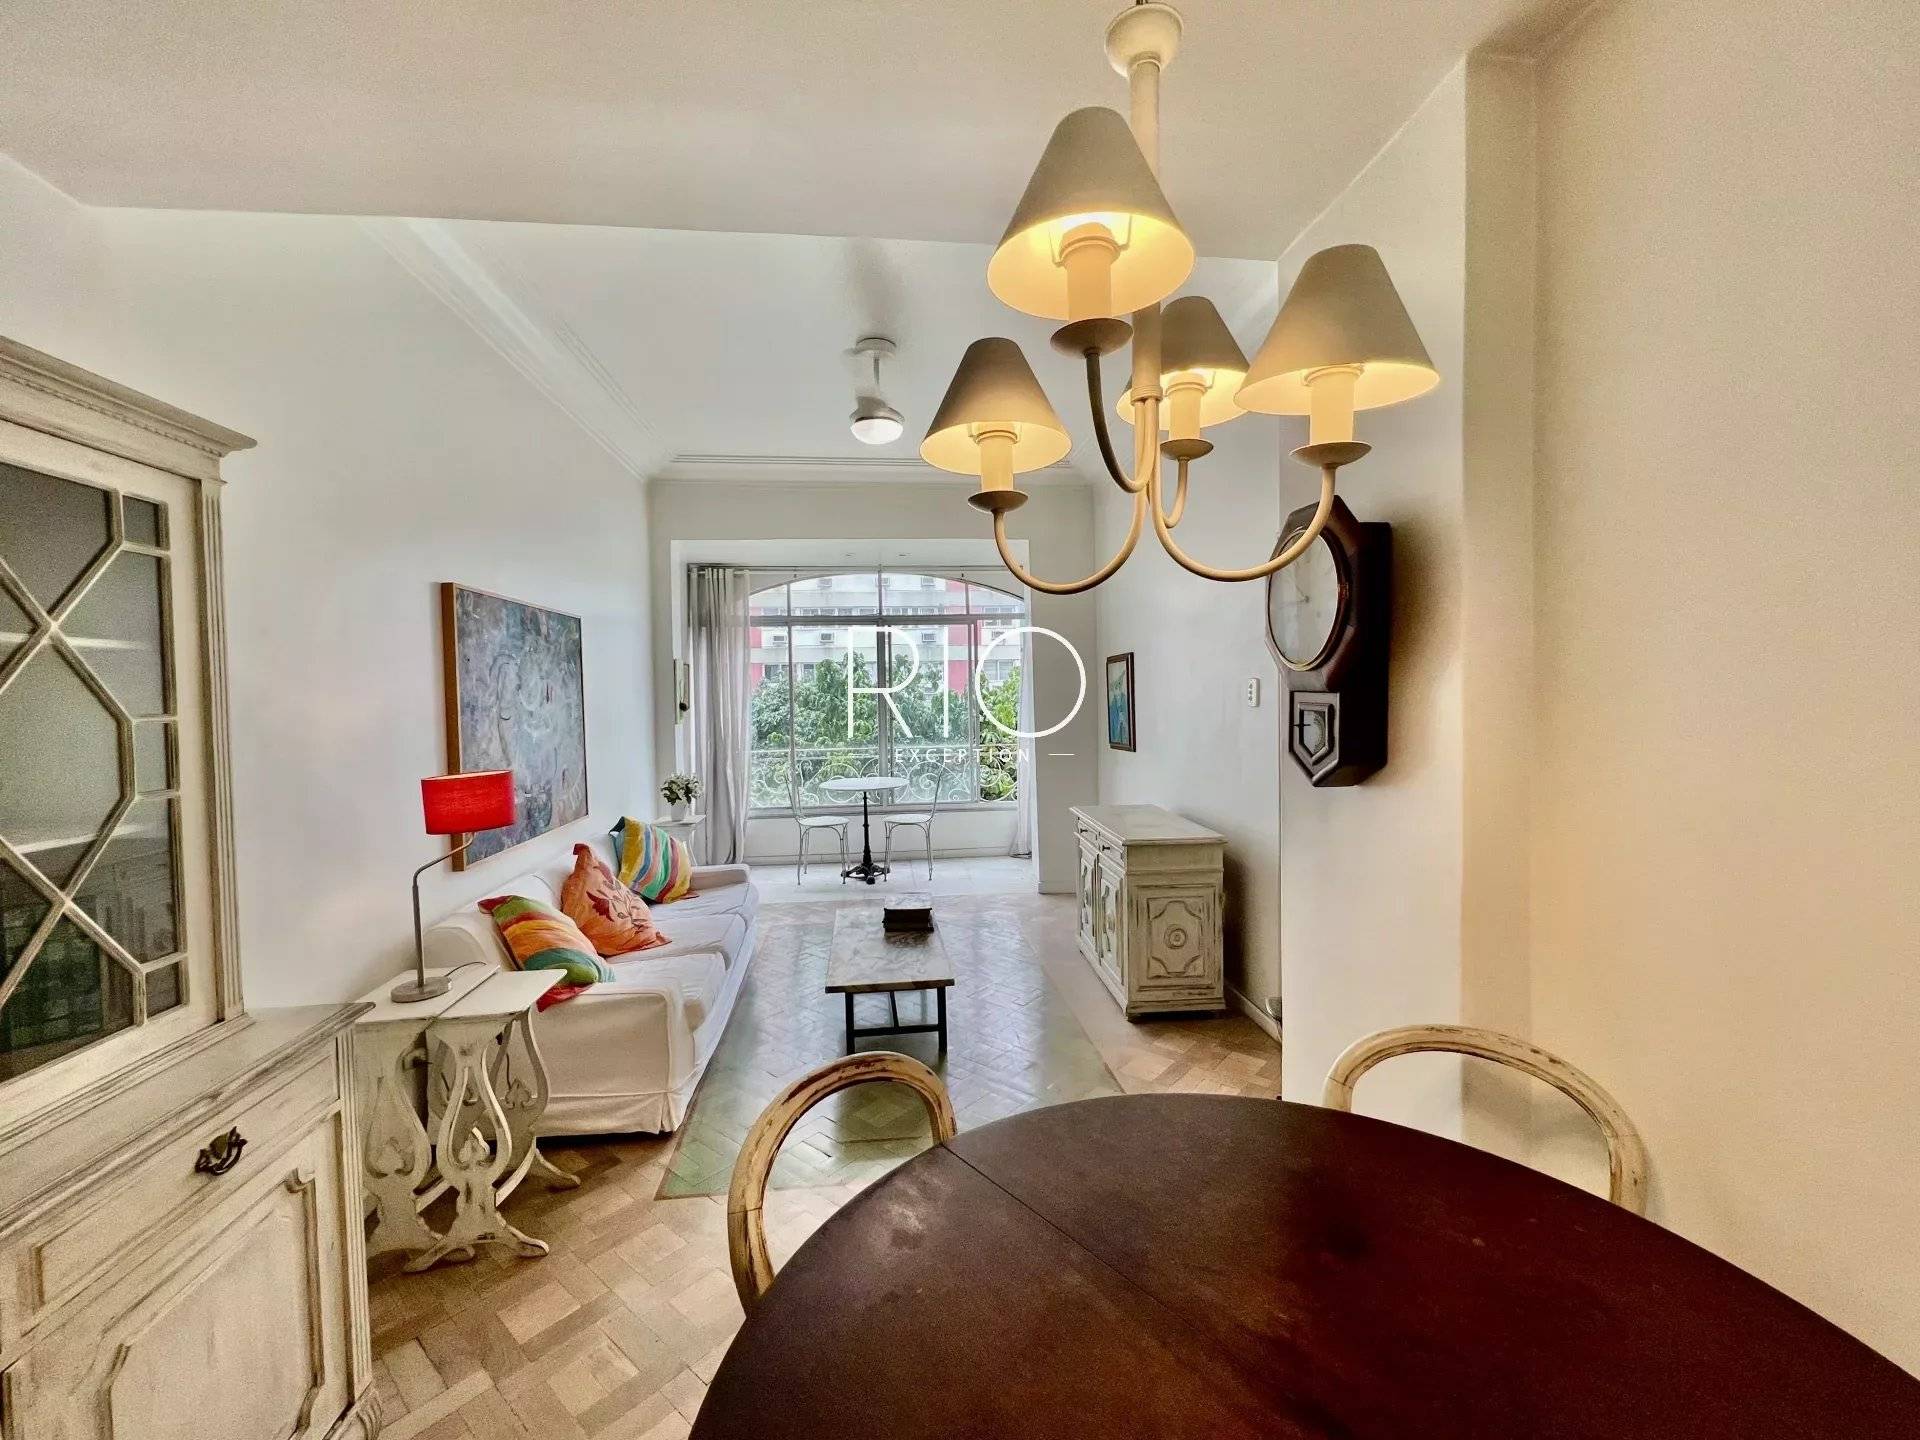 IPANEMA near Place NS DA PAZ - Charming apartment of 75m2 - 2 bedrooms, to refresh.